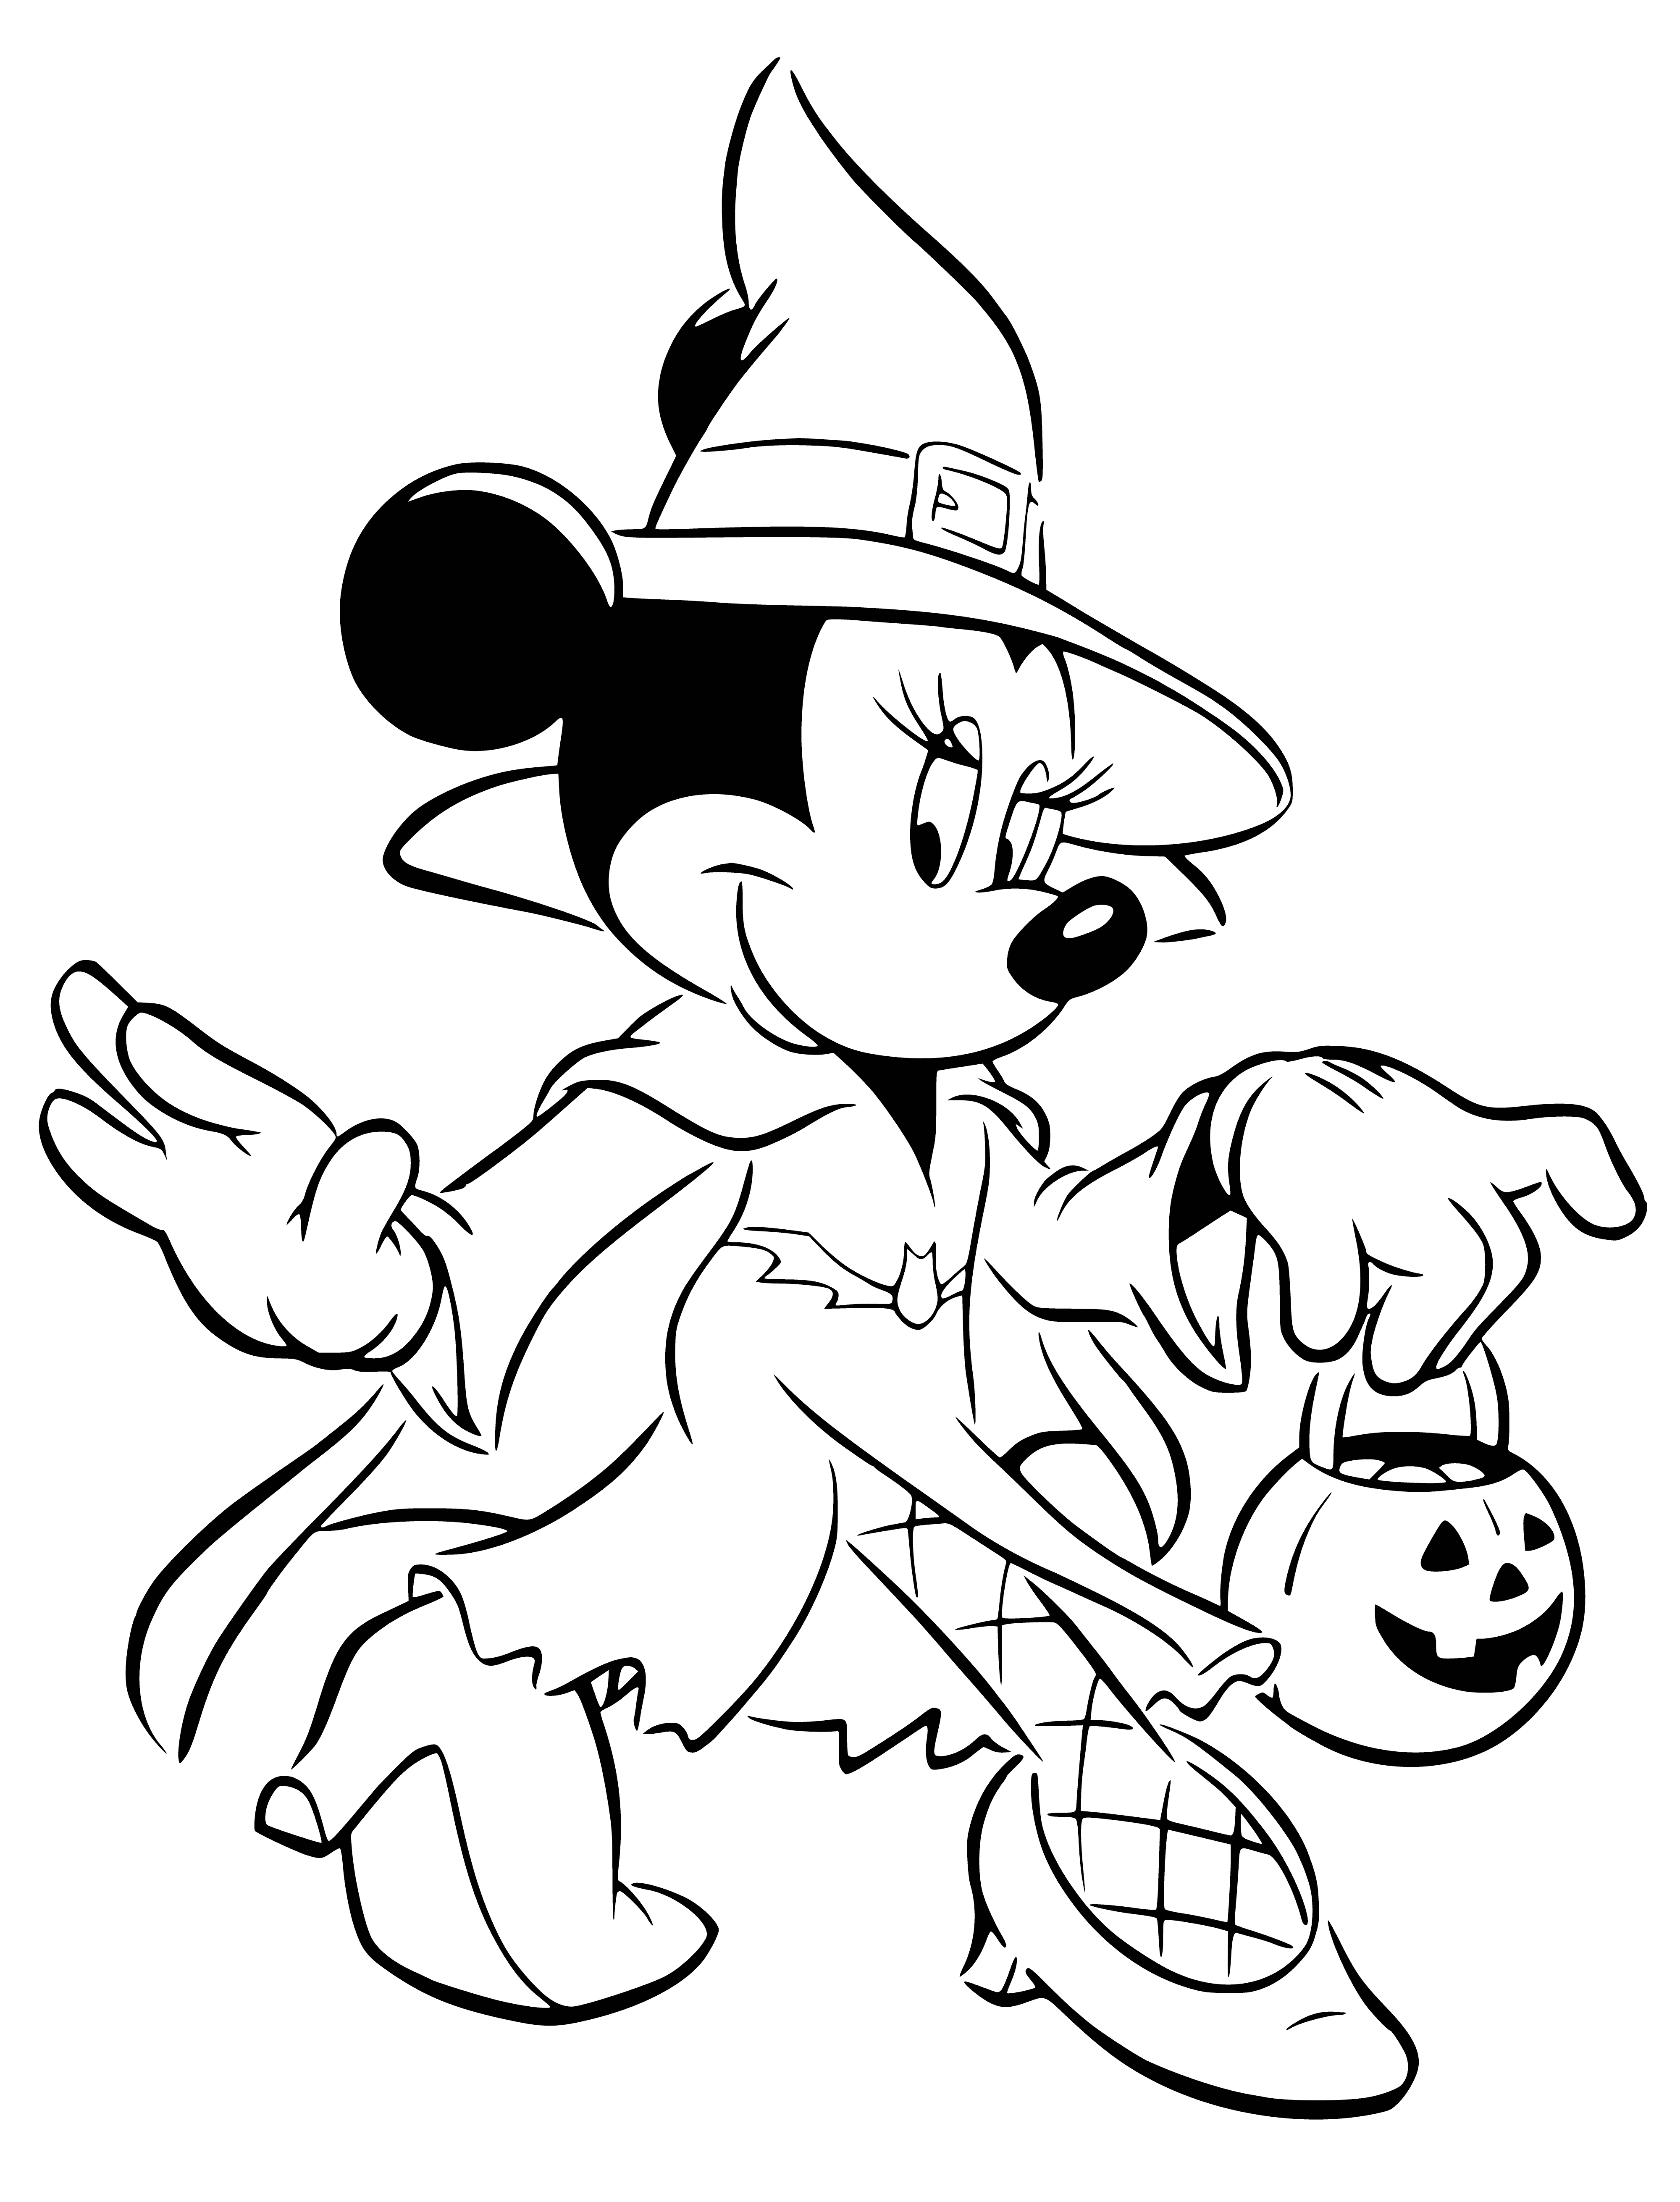 coloring page: Minnie Mouse is all ready for Halloween with a black dress, white polka dot bow, jack-o-lantern, and candle. She's headed out to go trick-or-treating with a big smile! #Halloween #MinnieMouse